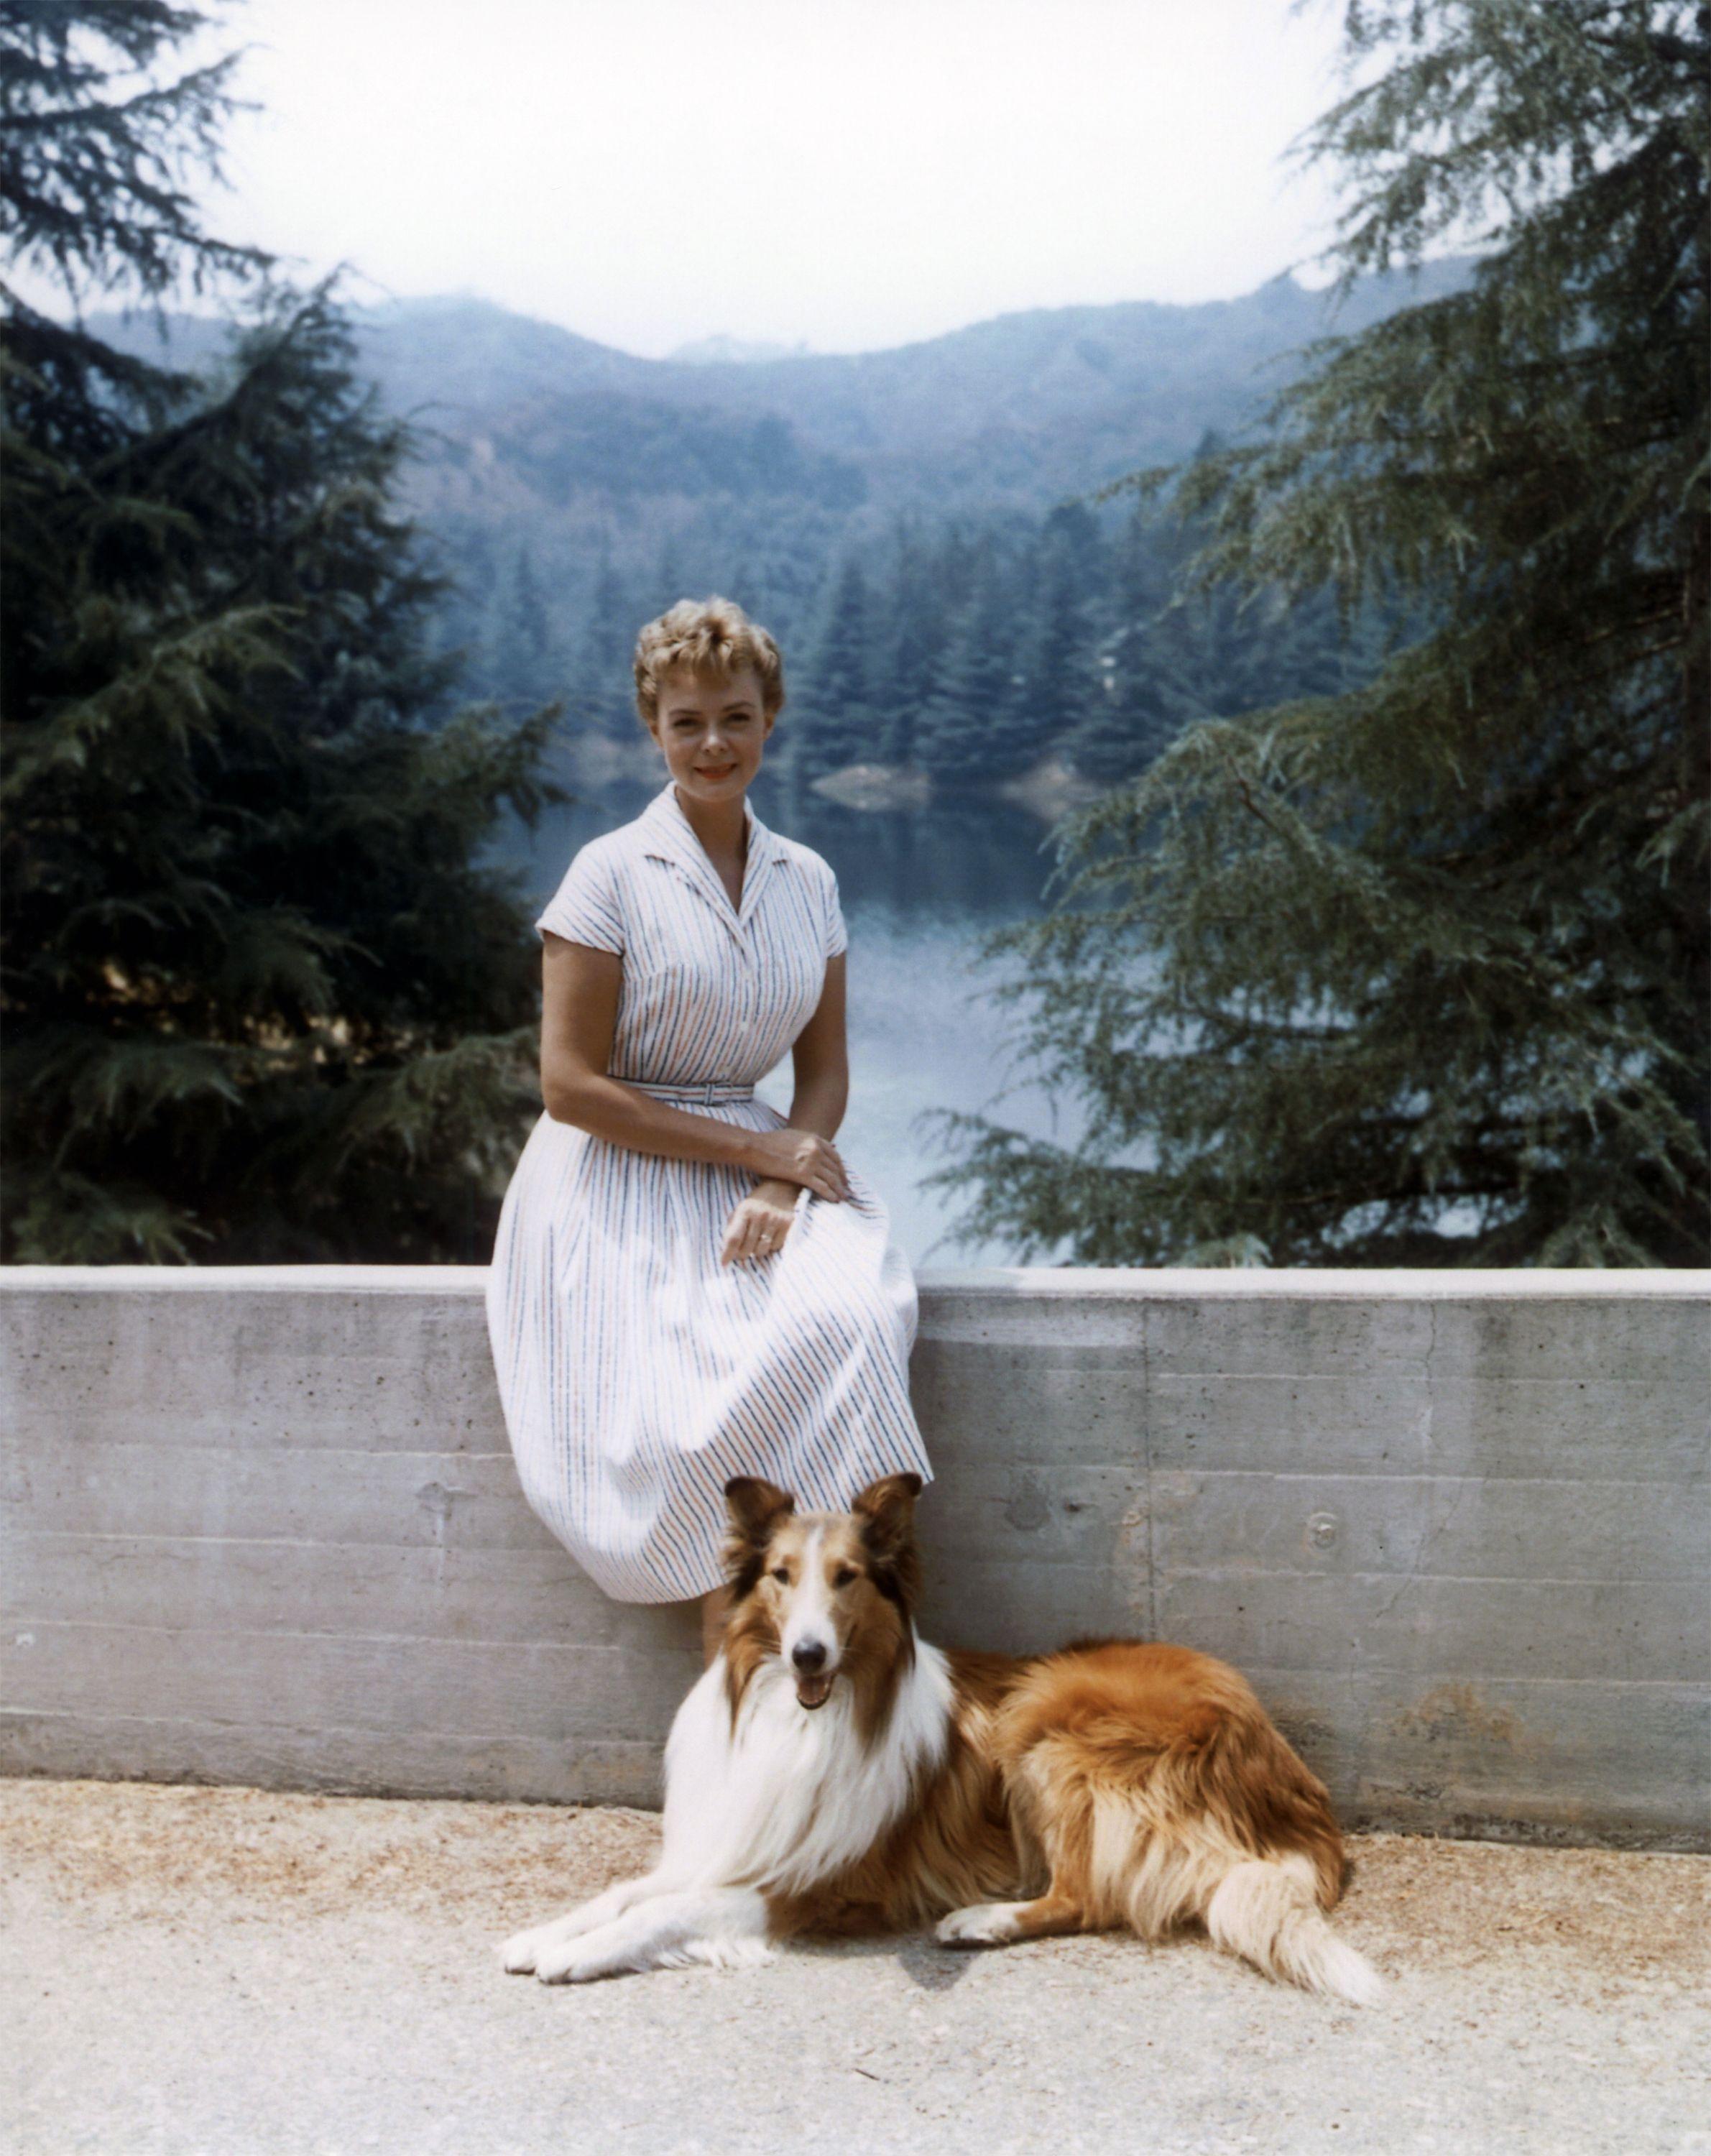 June Lockhart with Lassie c. 1959 - She started in the 5th season